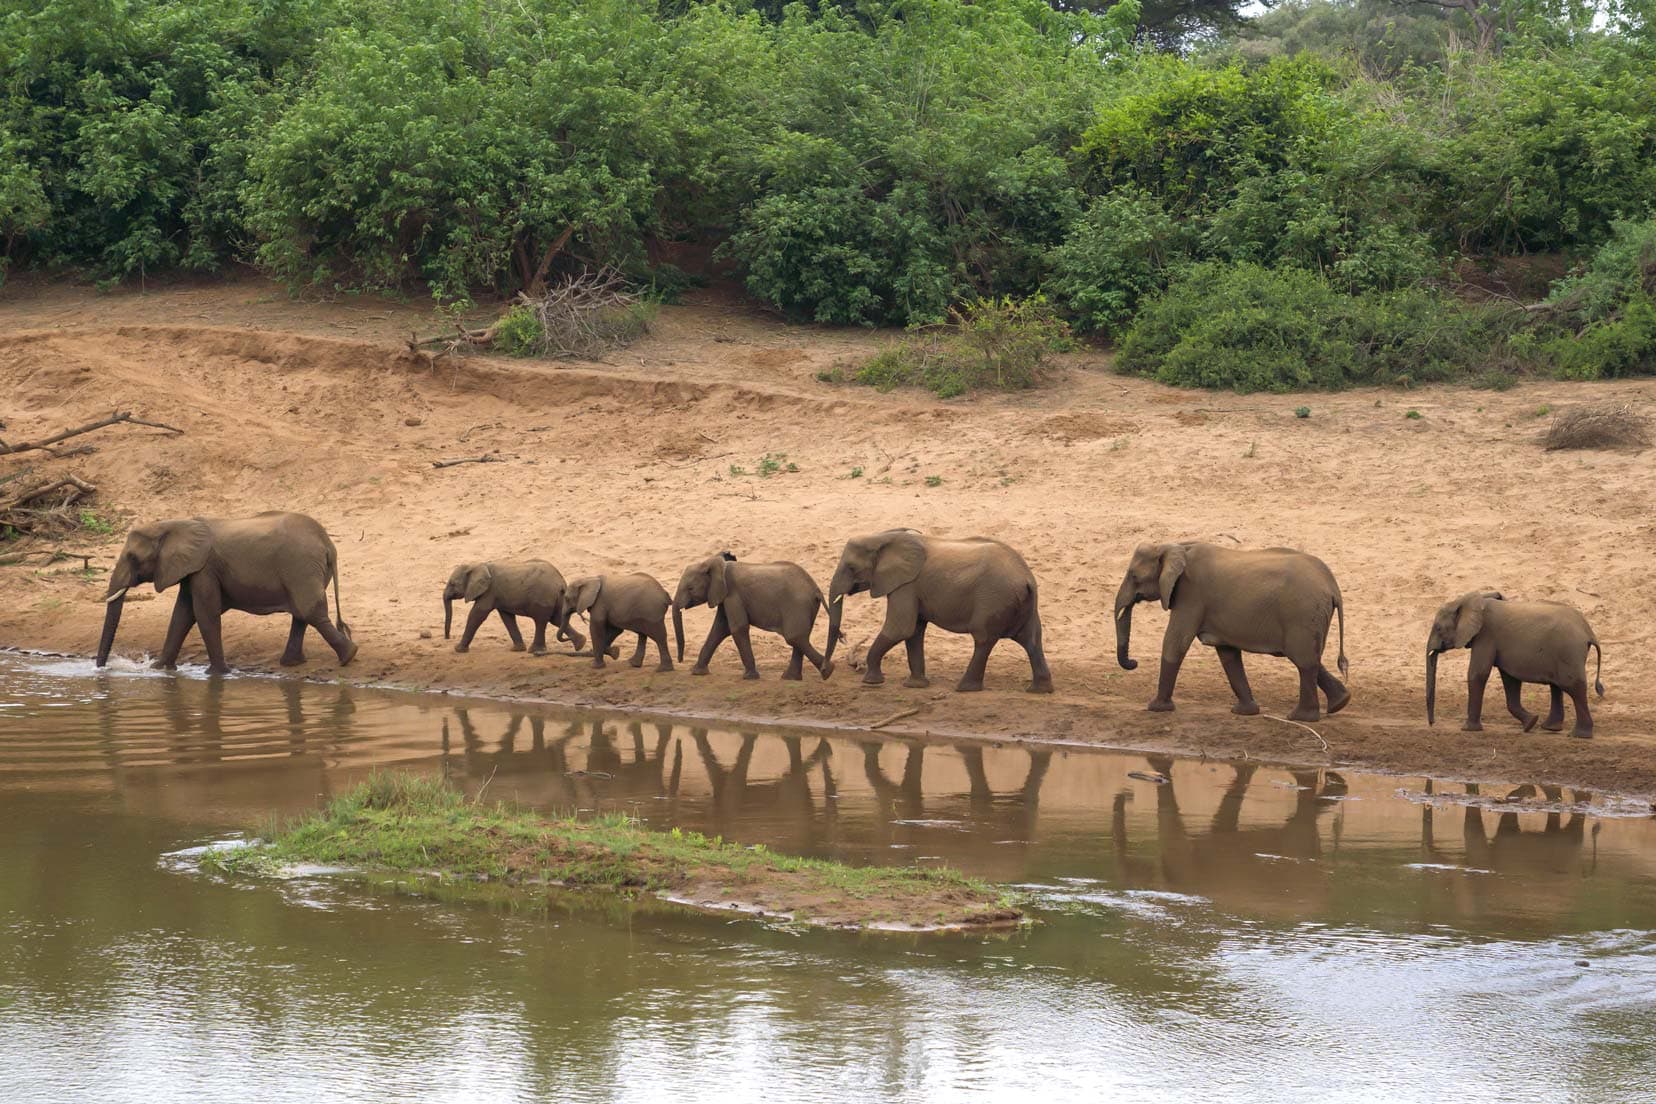 Elephants crossing the Luvuvhu River by the Pafuri Picnic Site